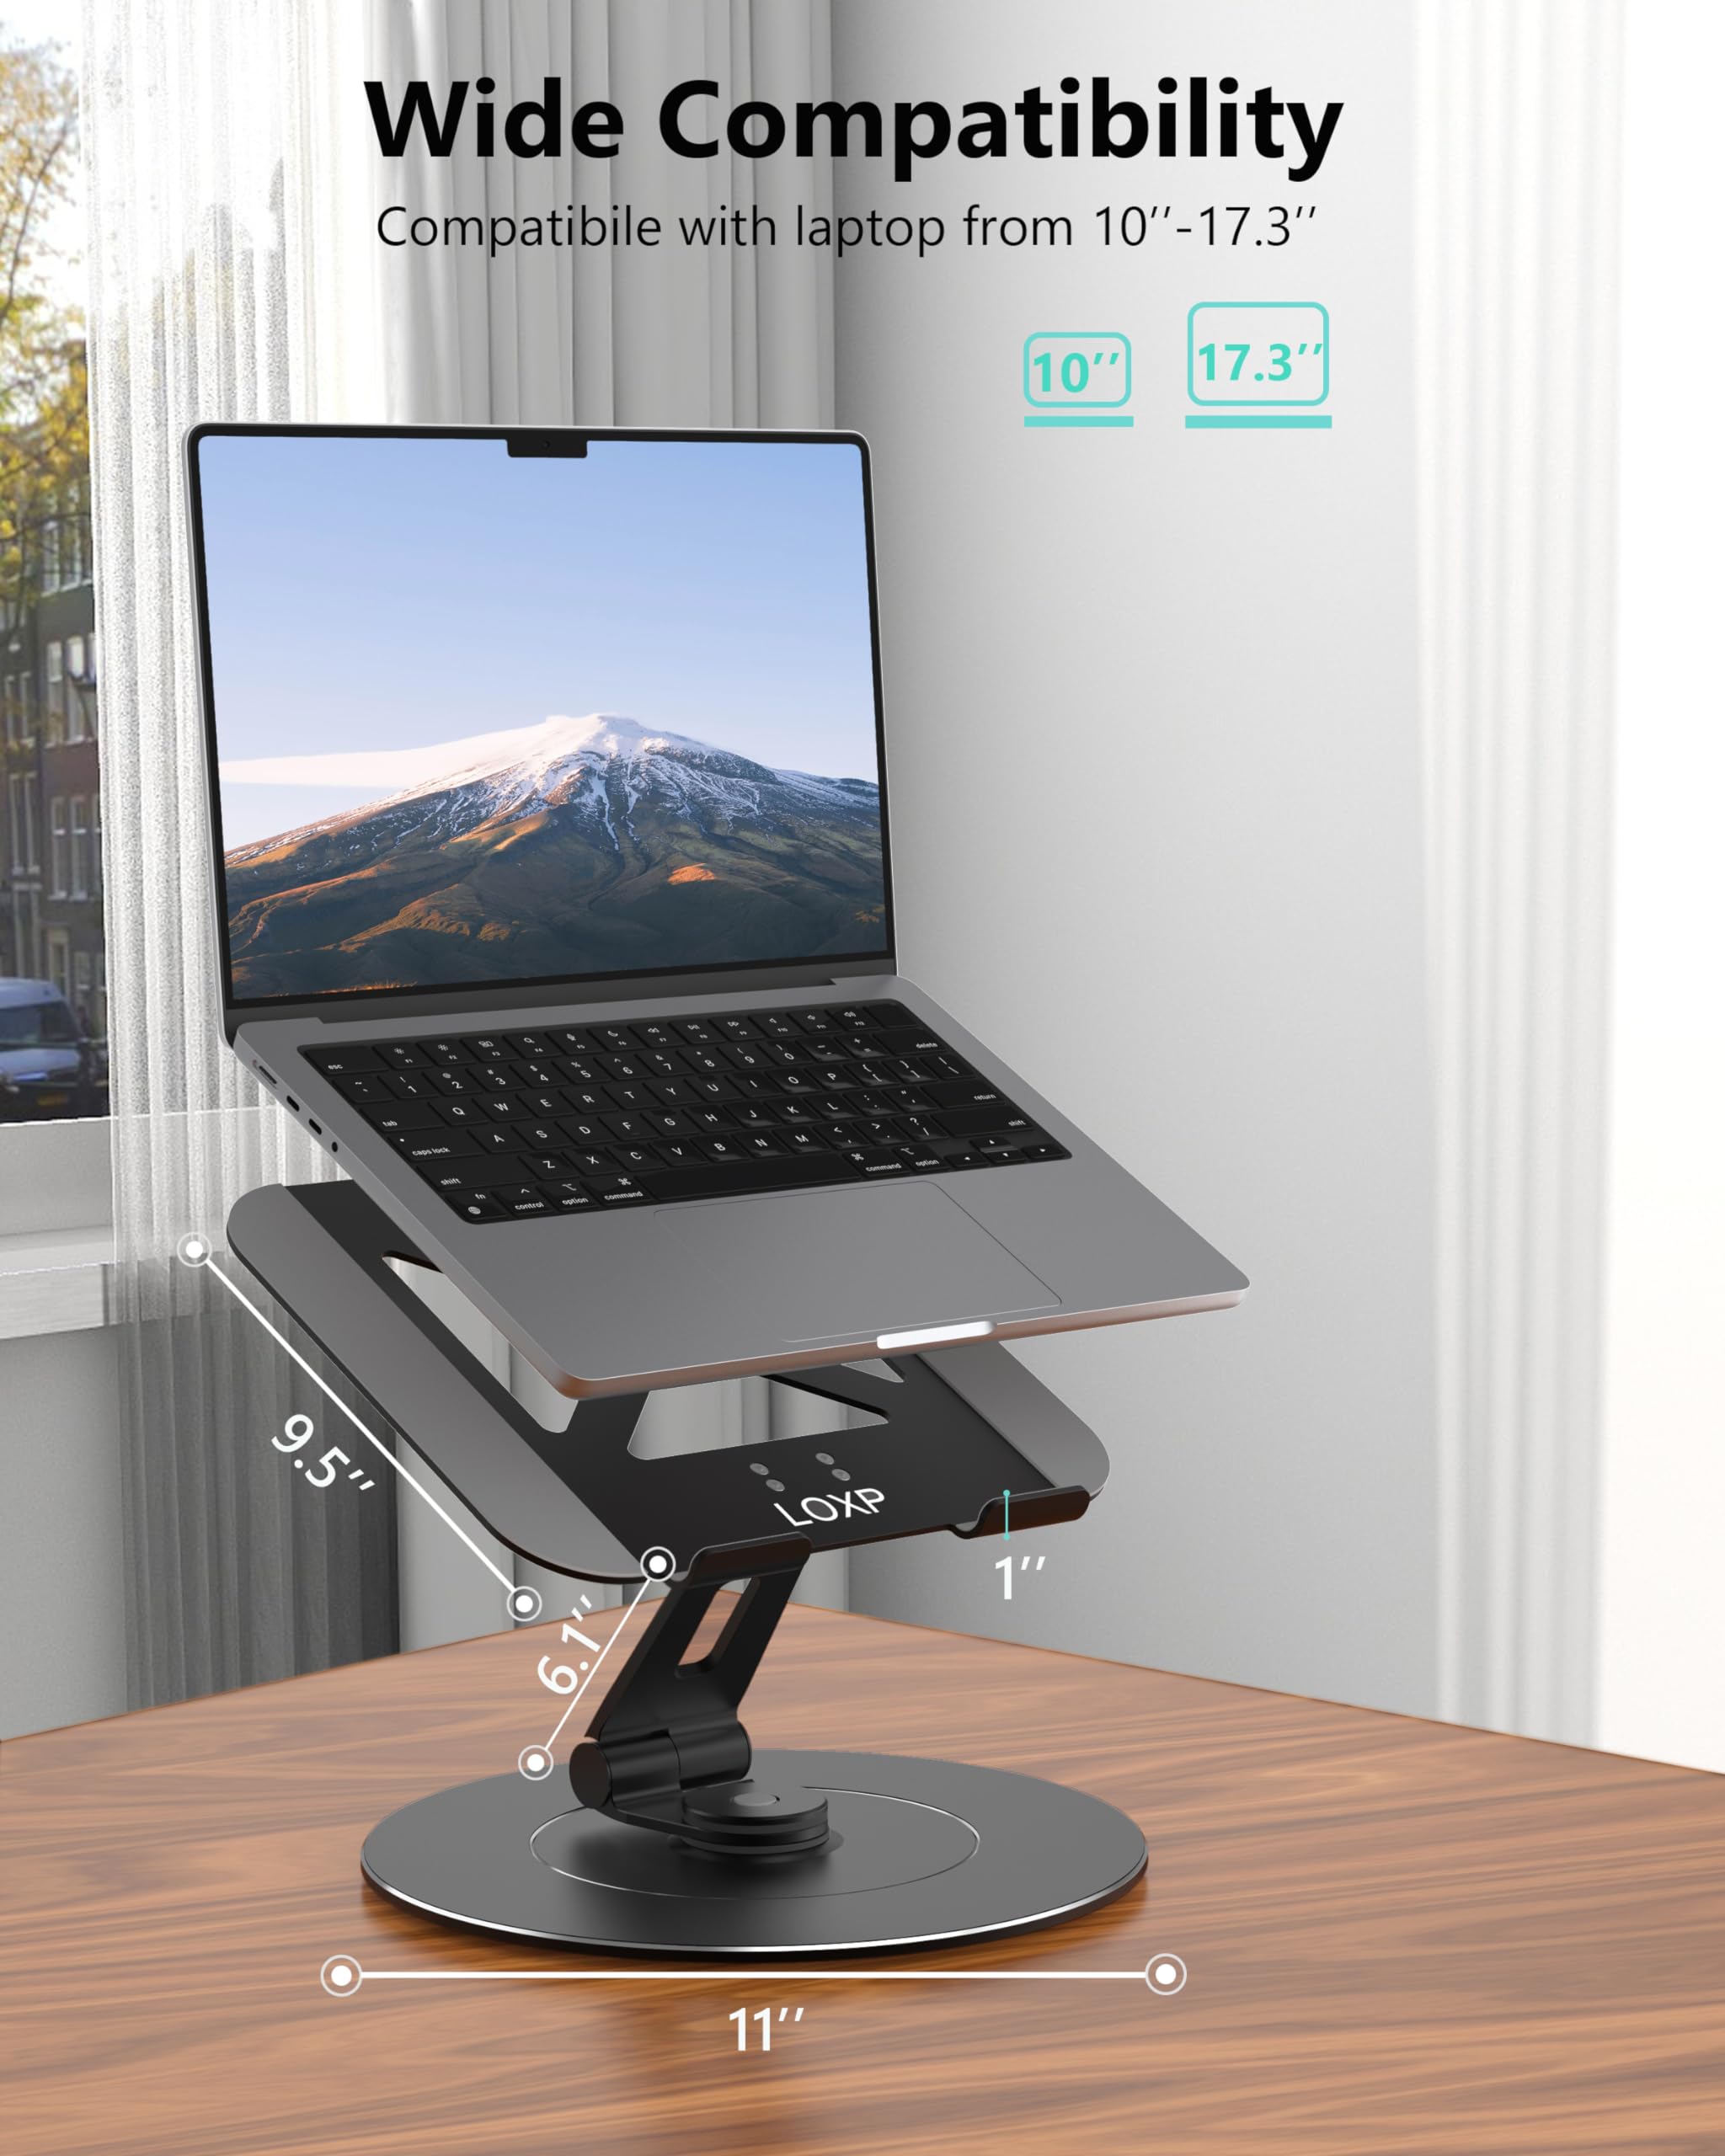 LOXP Ultra-Stable Aluminumy Swivel Laptop Stand for Desk with Rotating Foldable Phone Holder, 300% Large Base Stability, Anti-Loosening,Suitable for 10"-17.3" Laptops, Black